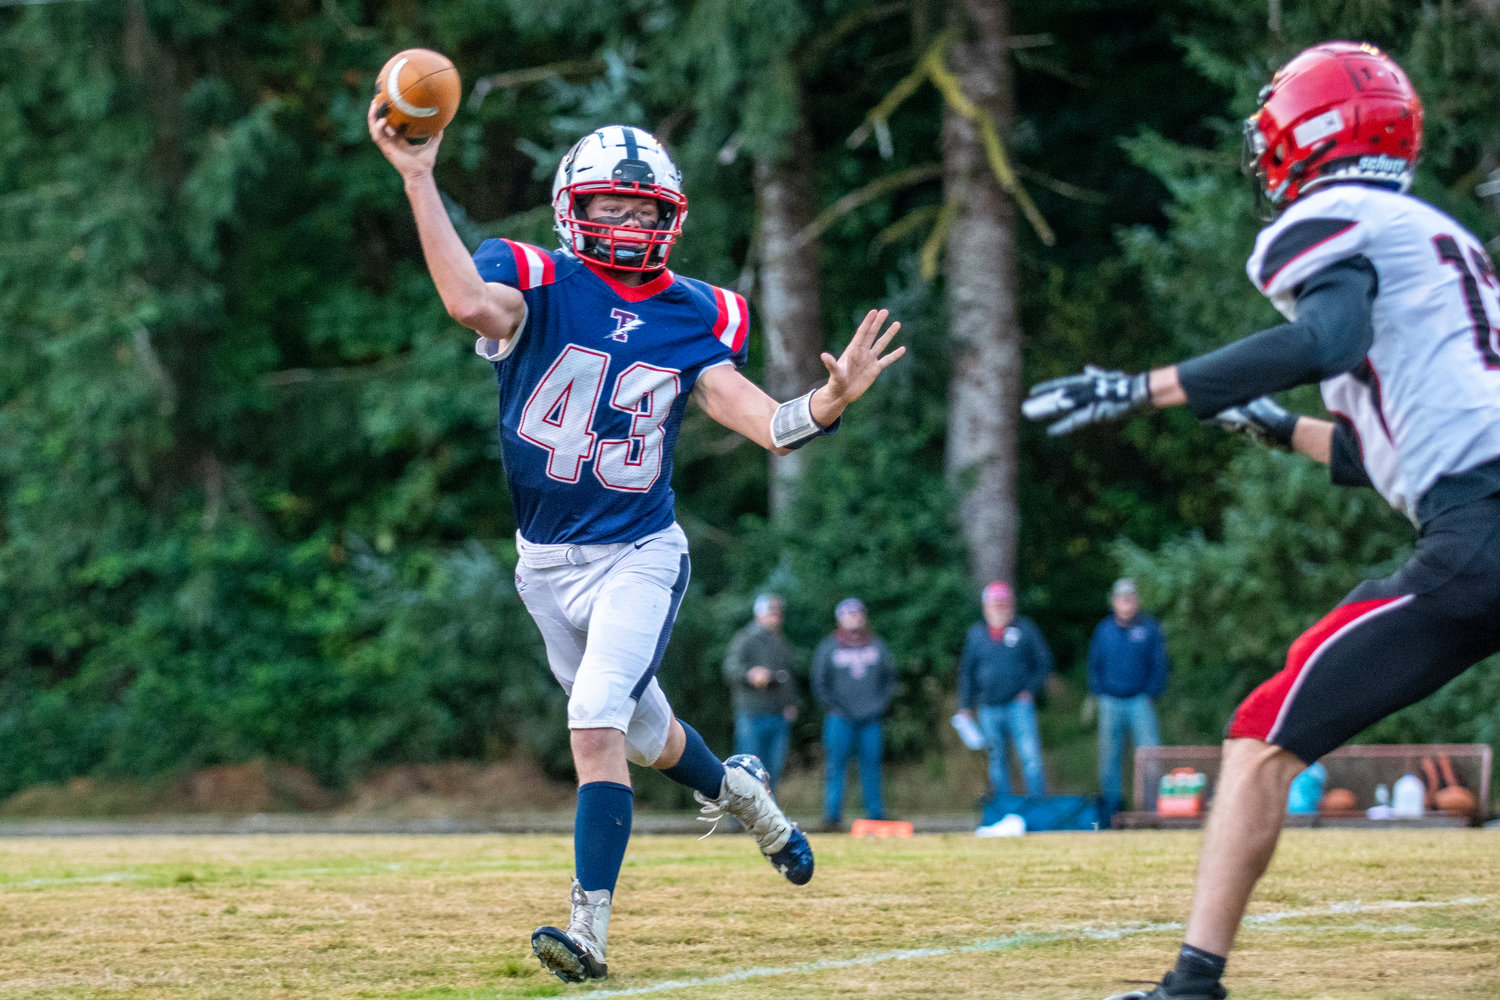 Pe Ell-Willapa Valley quarterback Kolten Fluke (43) prepares to pass during a home game against Wahkiakum at Crogstad Field in Menlo on Sept. 16.